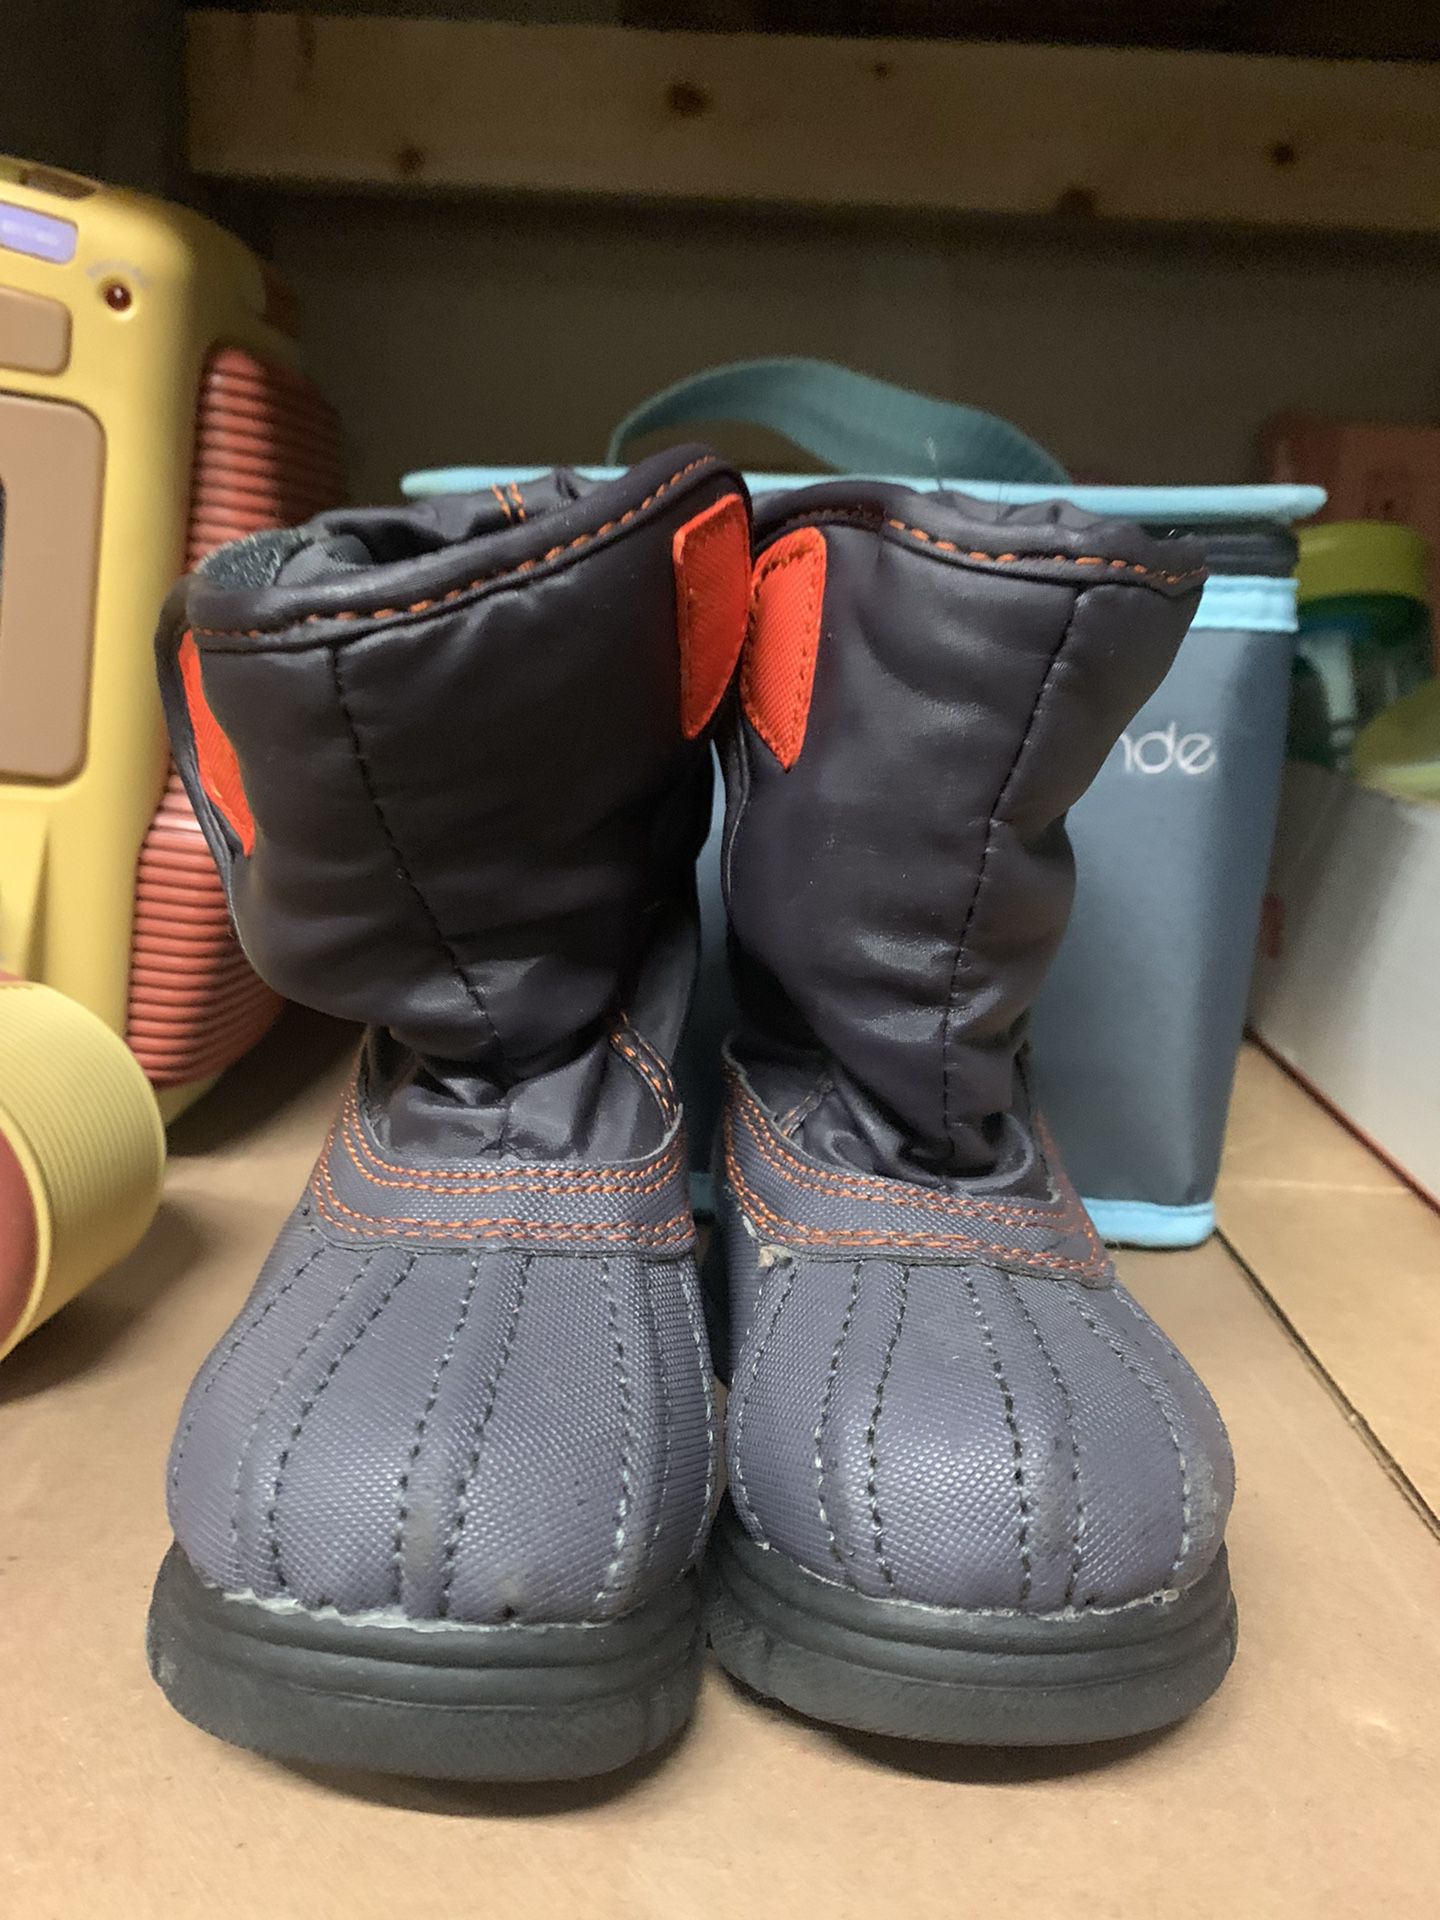 Toddler boy boots size 6 